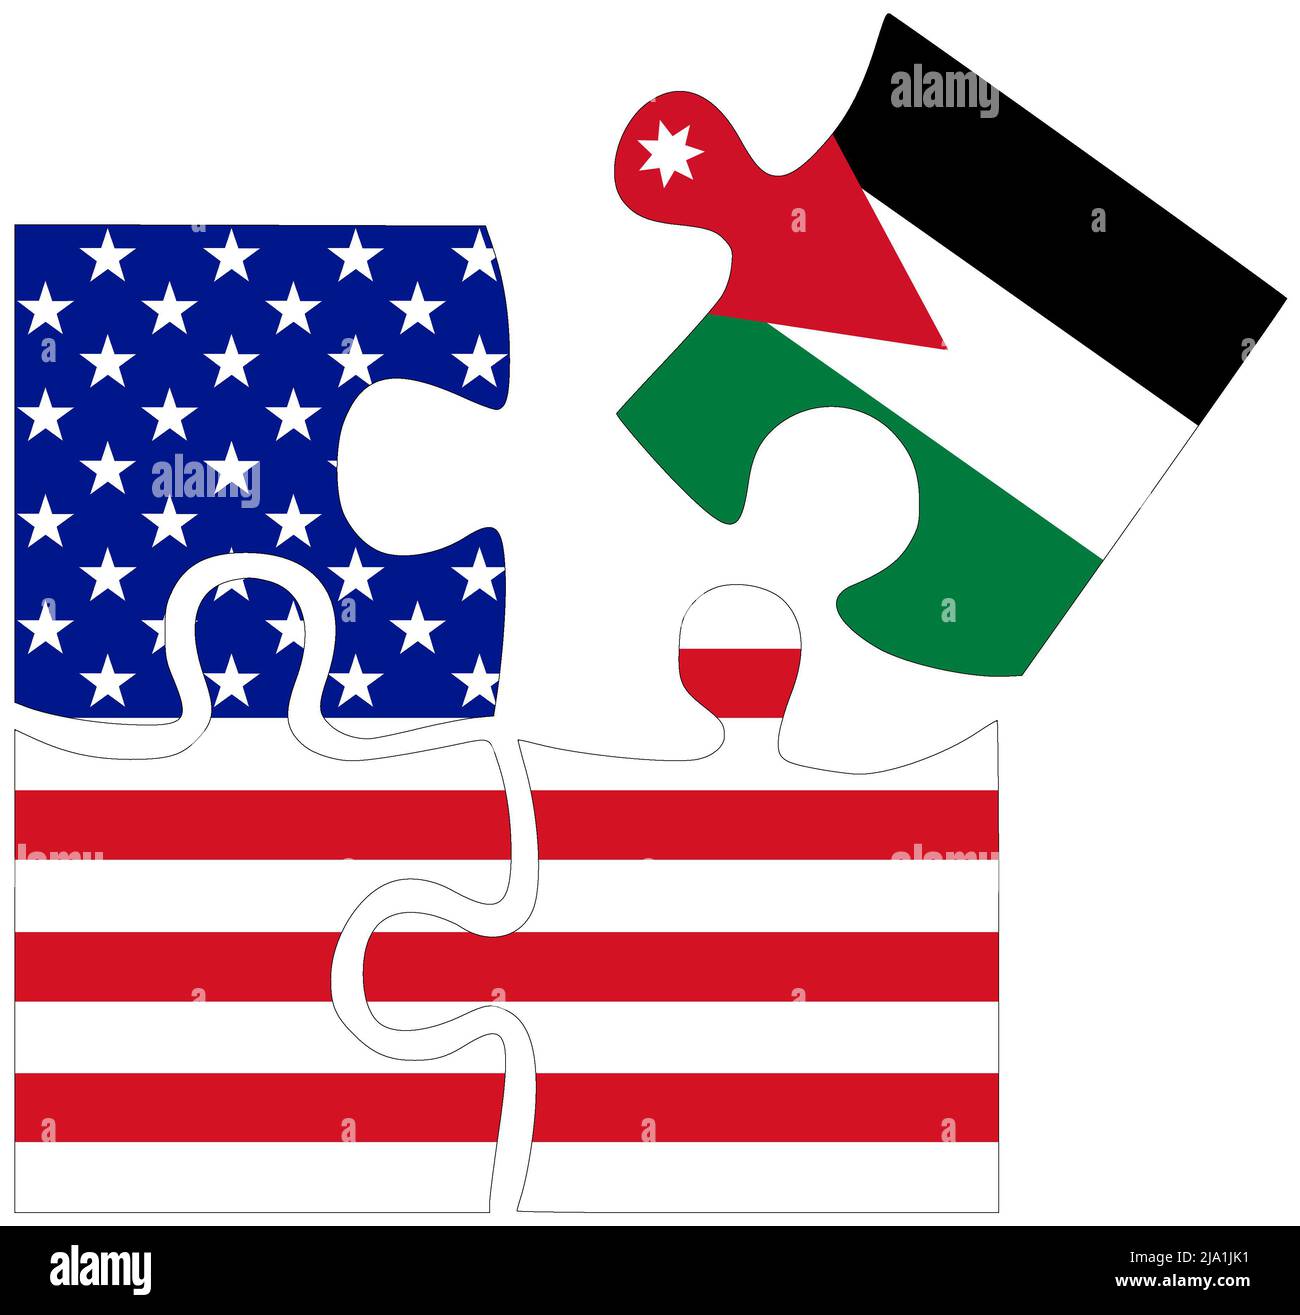 USA - Jordan : puzzle shapes with flags, symbol of agreement or friendship Stock Photo